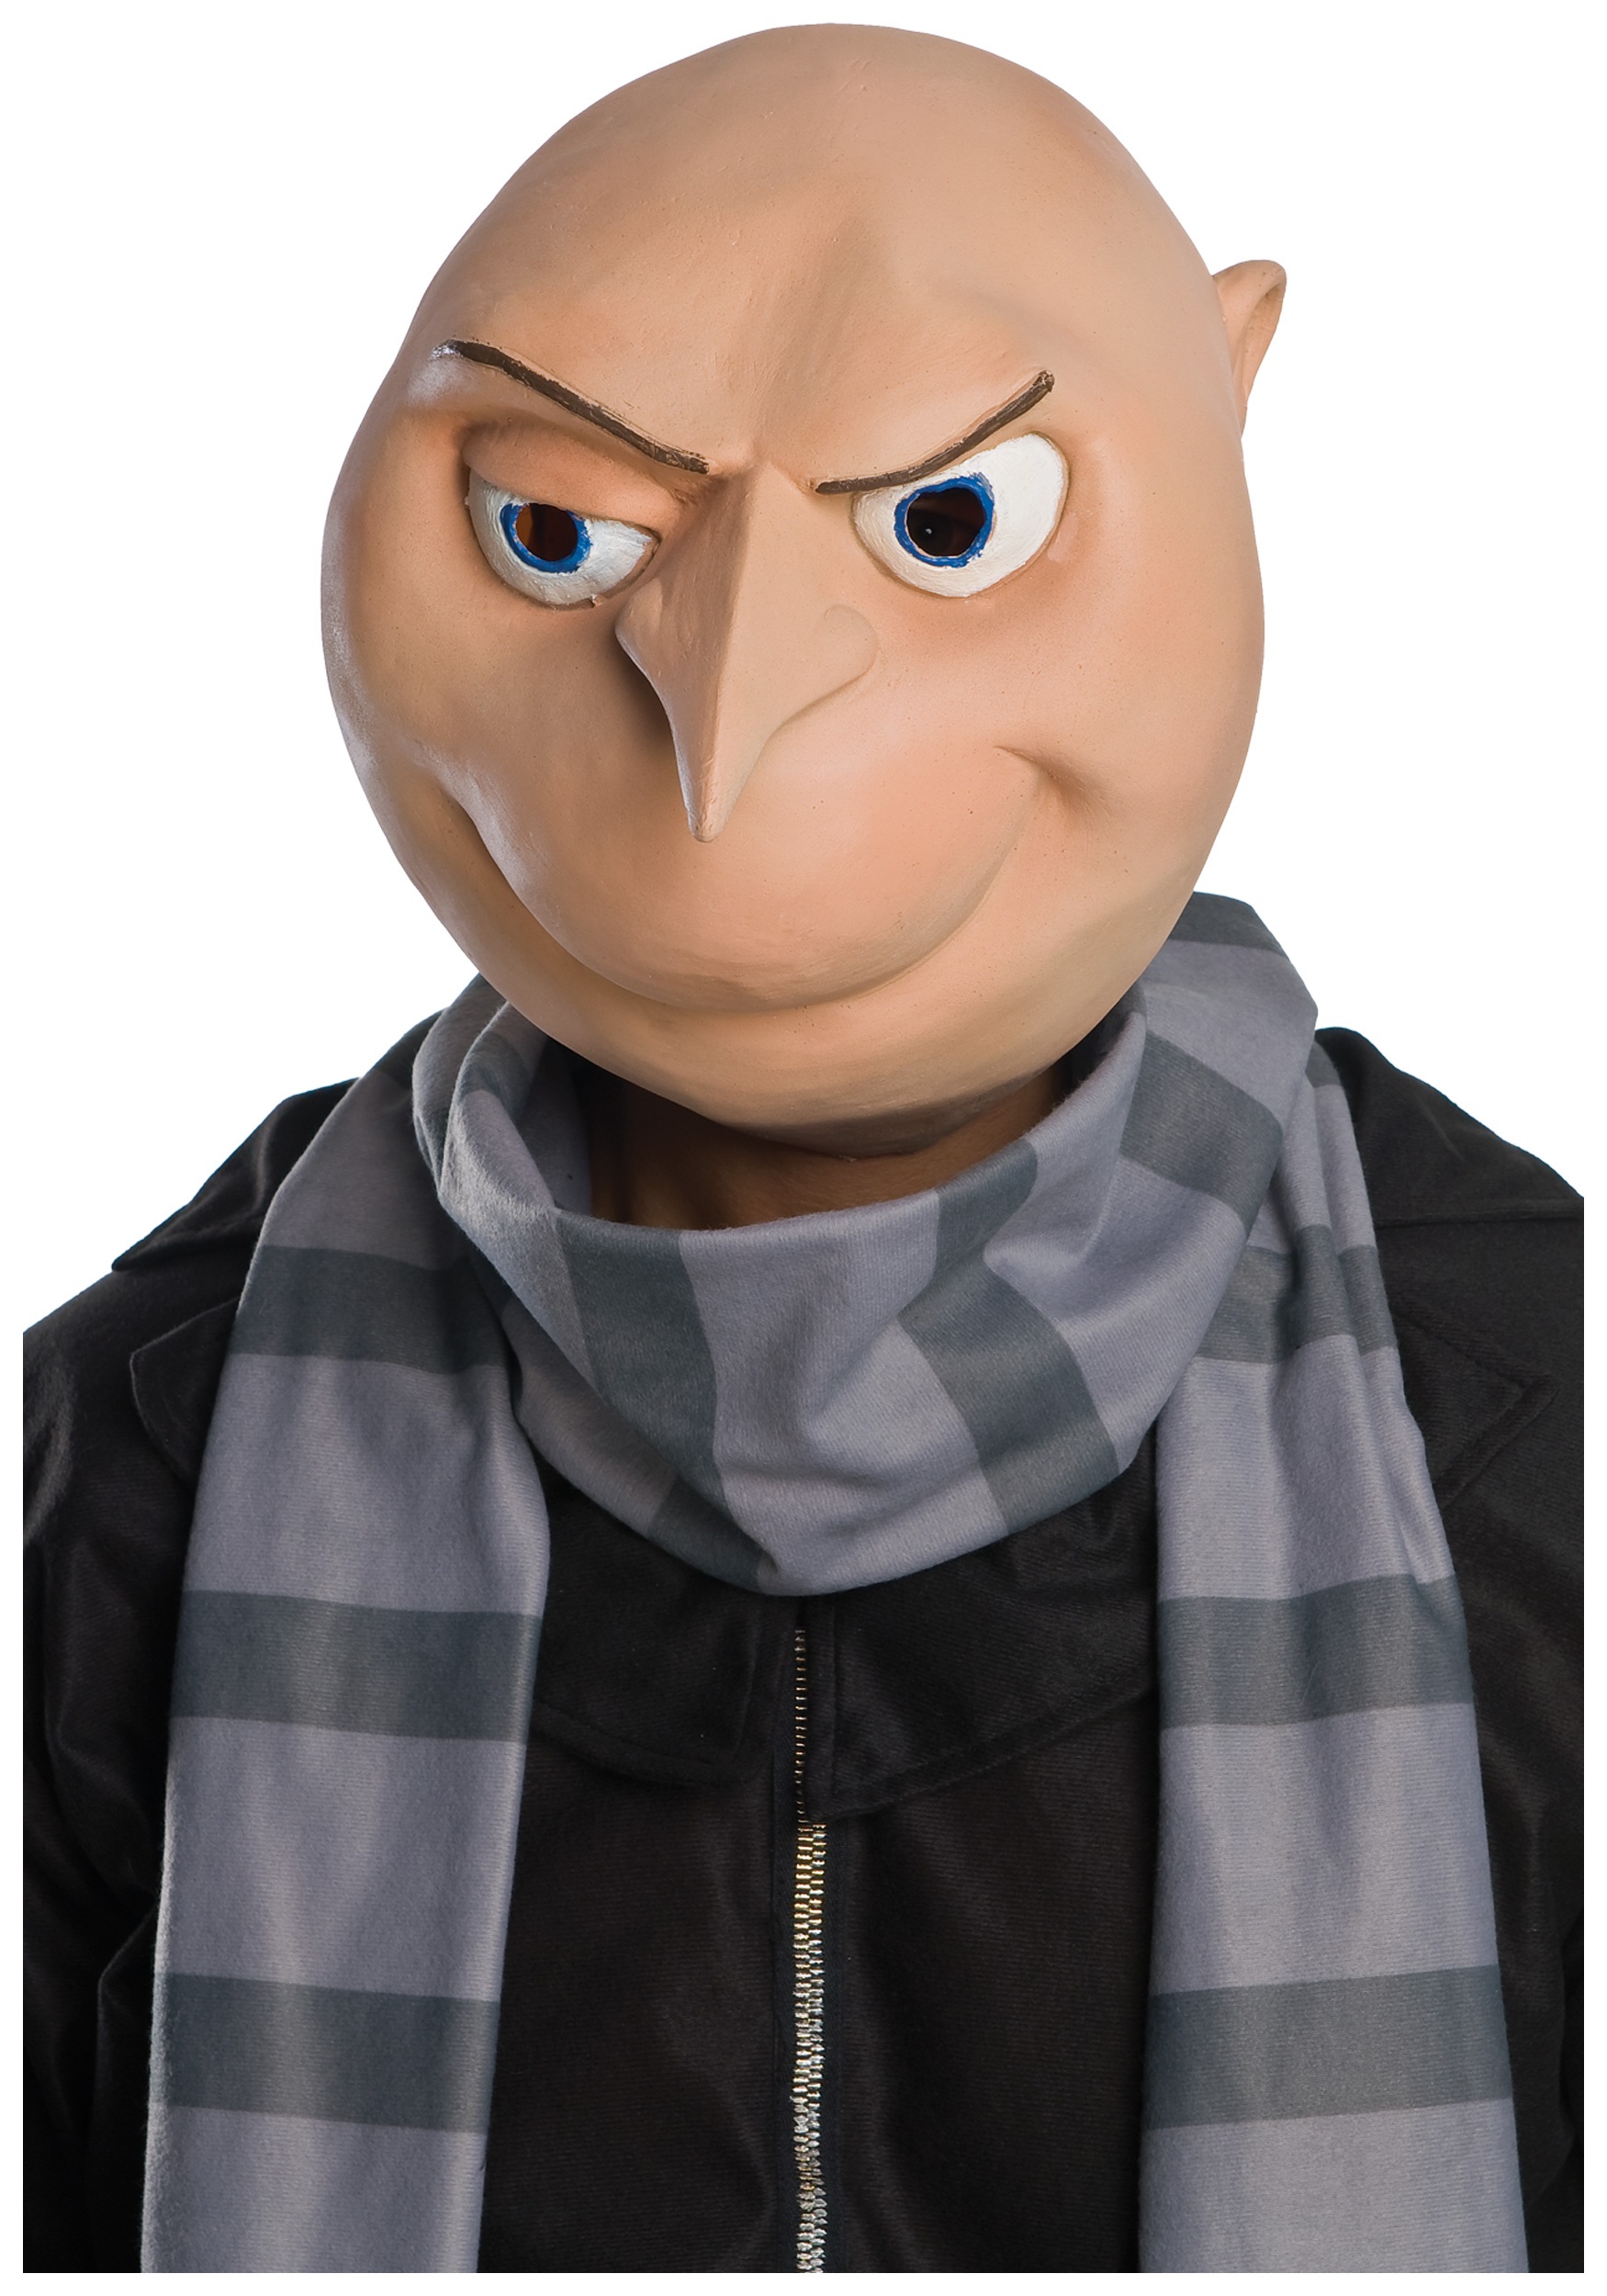 Adult Despicable Me Gru Mask - Halloween Costume Ideas 2022.